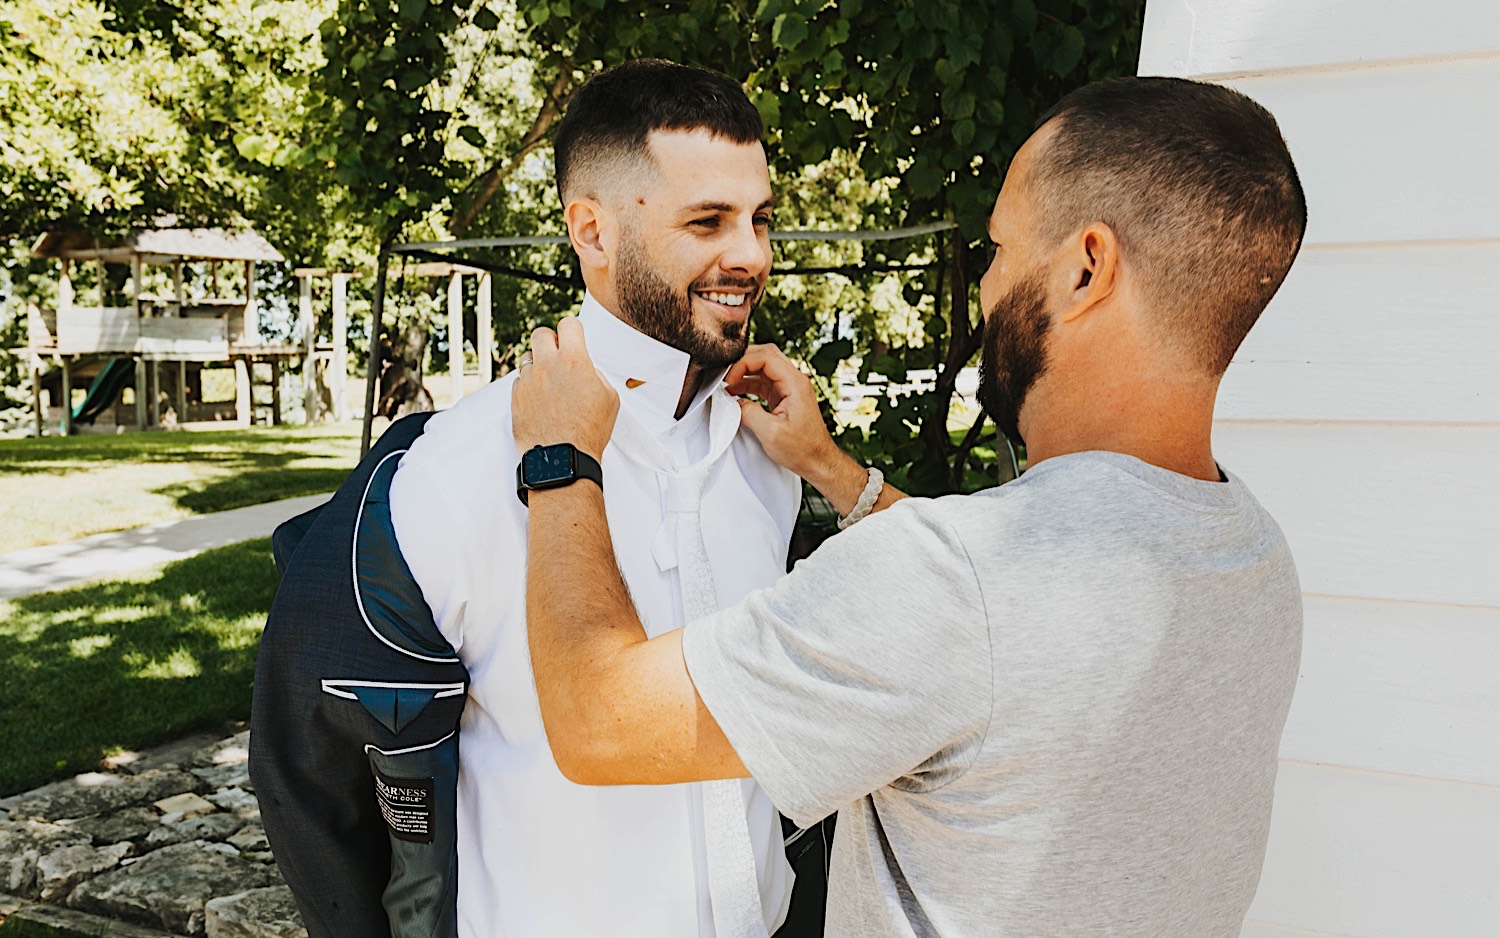 A groom smiles while standing outside as a friend helps adjust his shirt collar before his wedding at Legacy Hill Farm